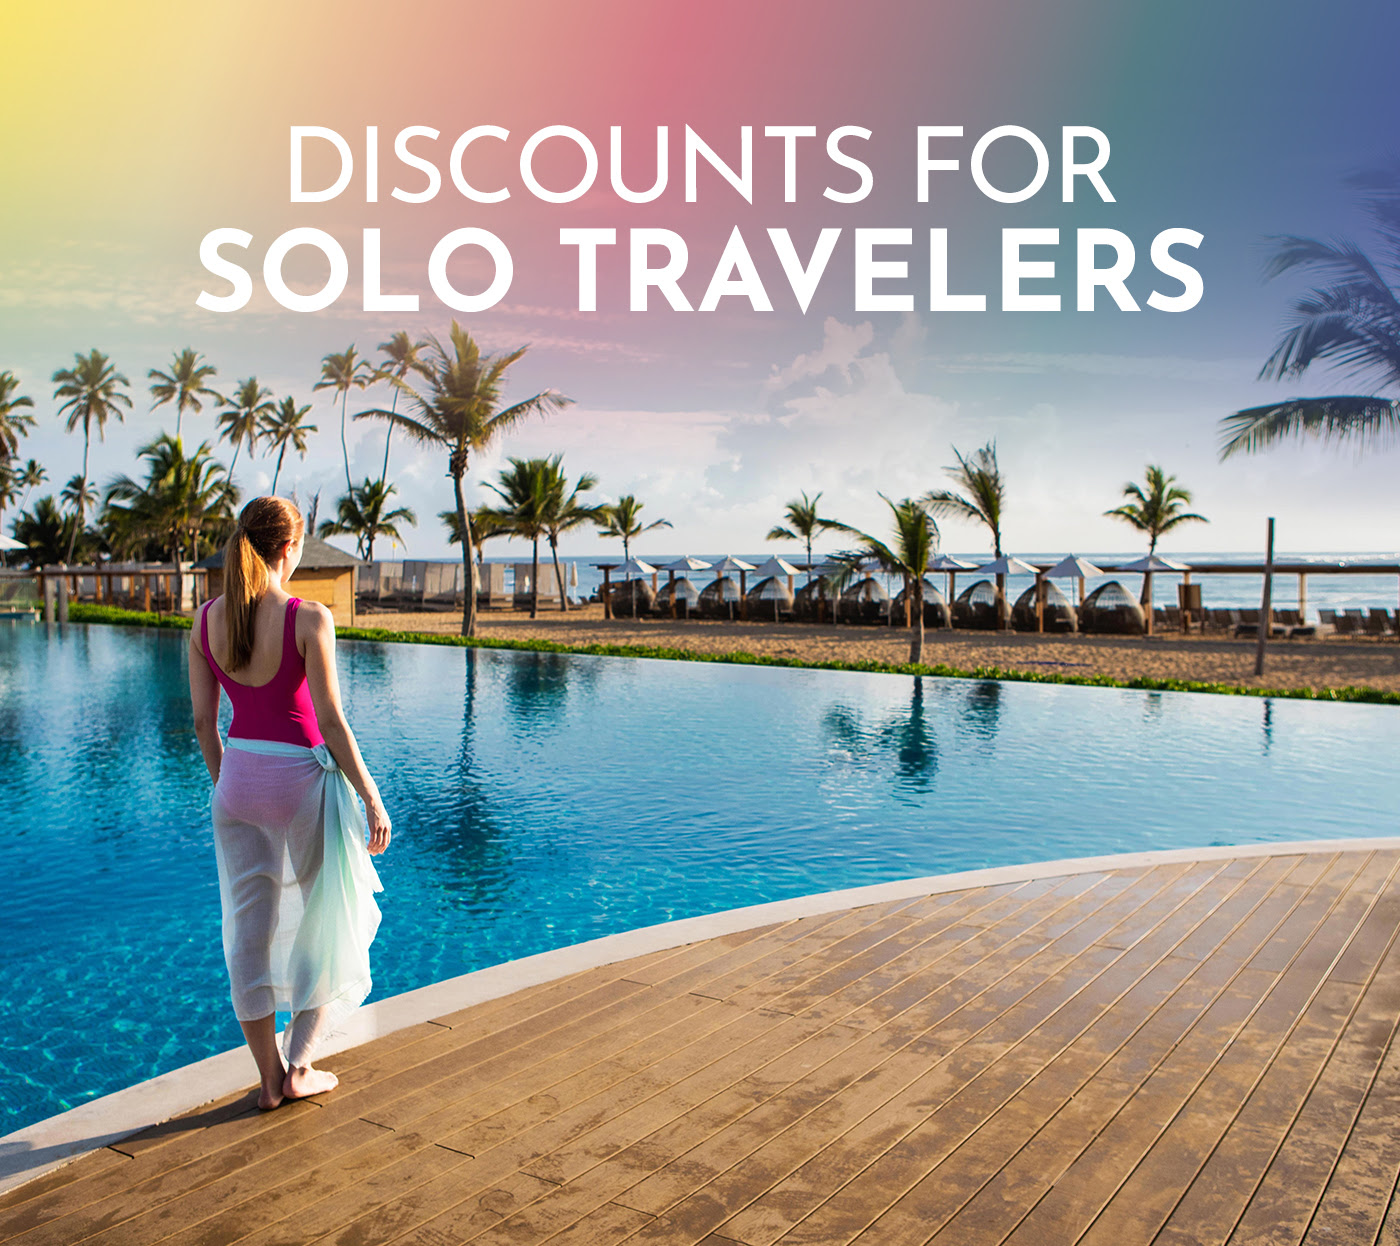 Discounts for Solo Travelers